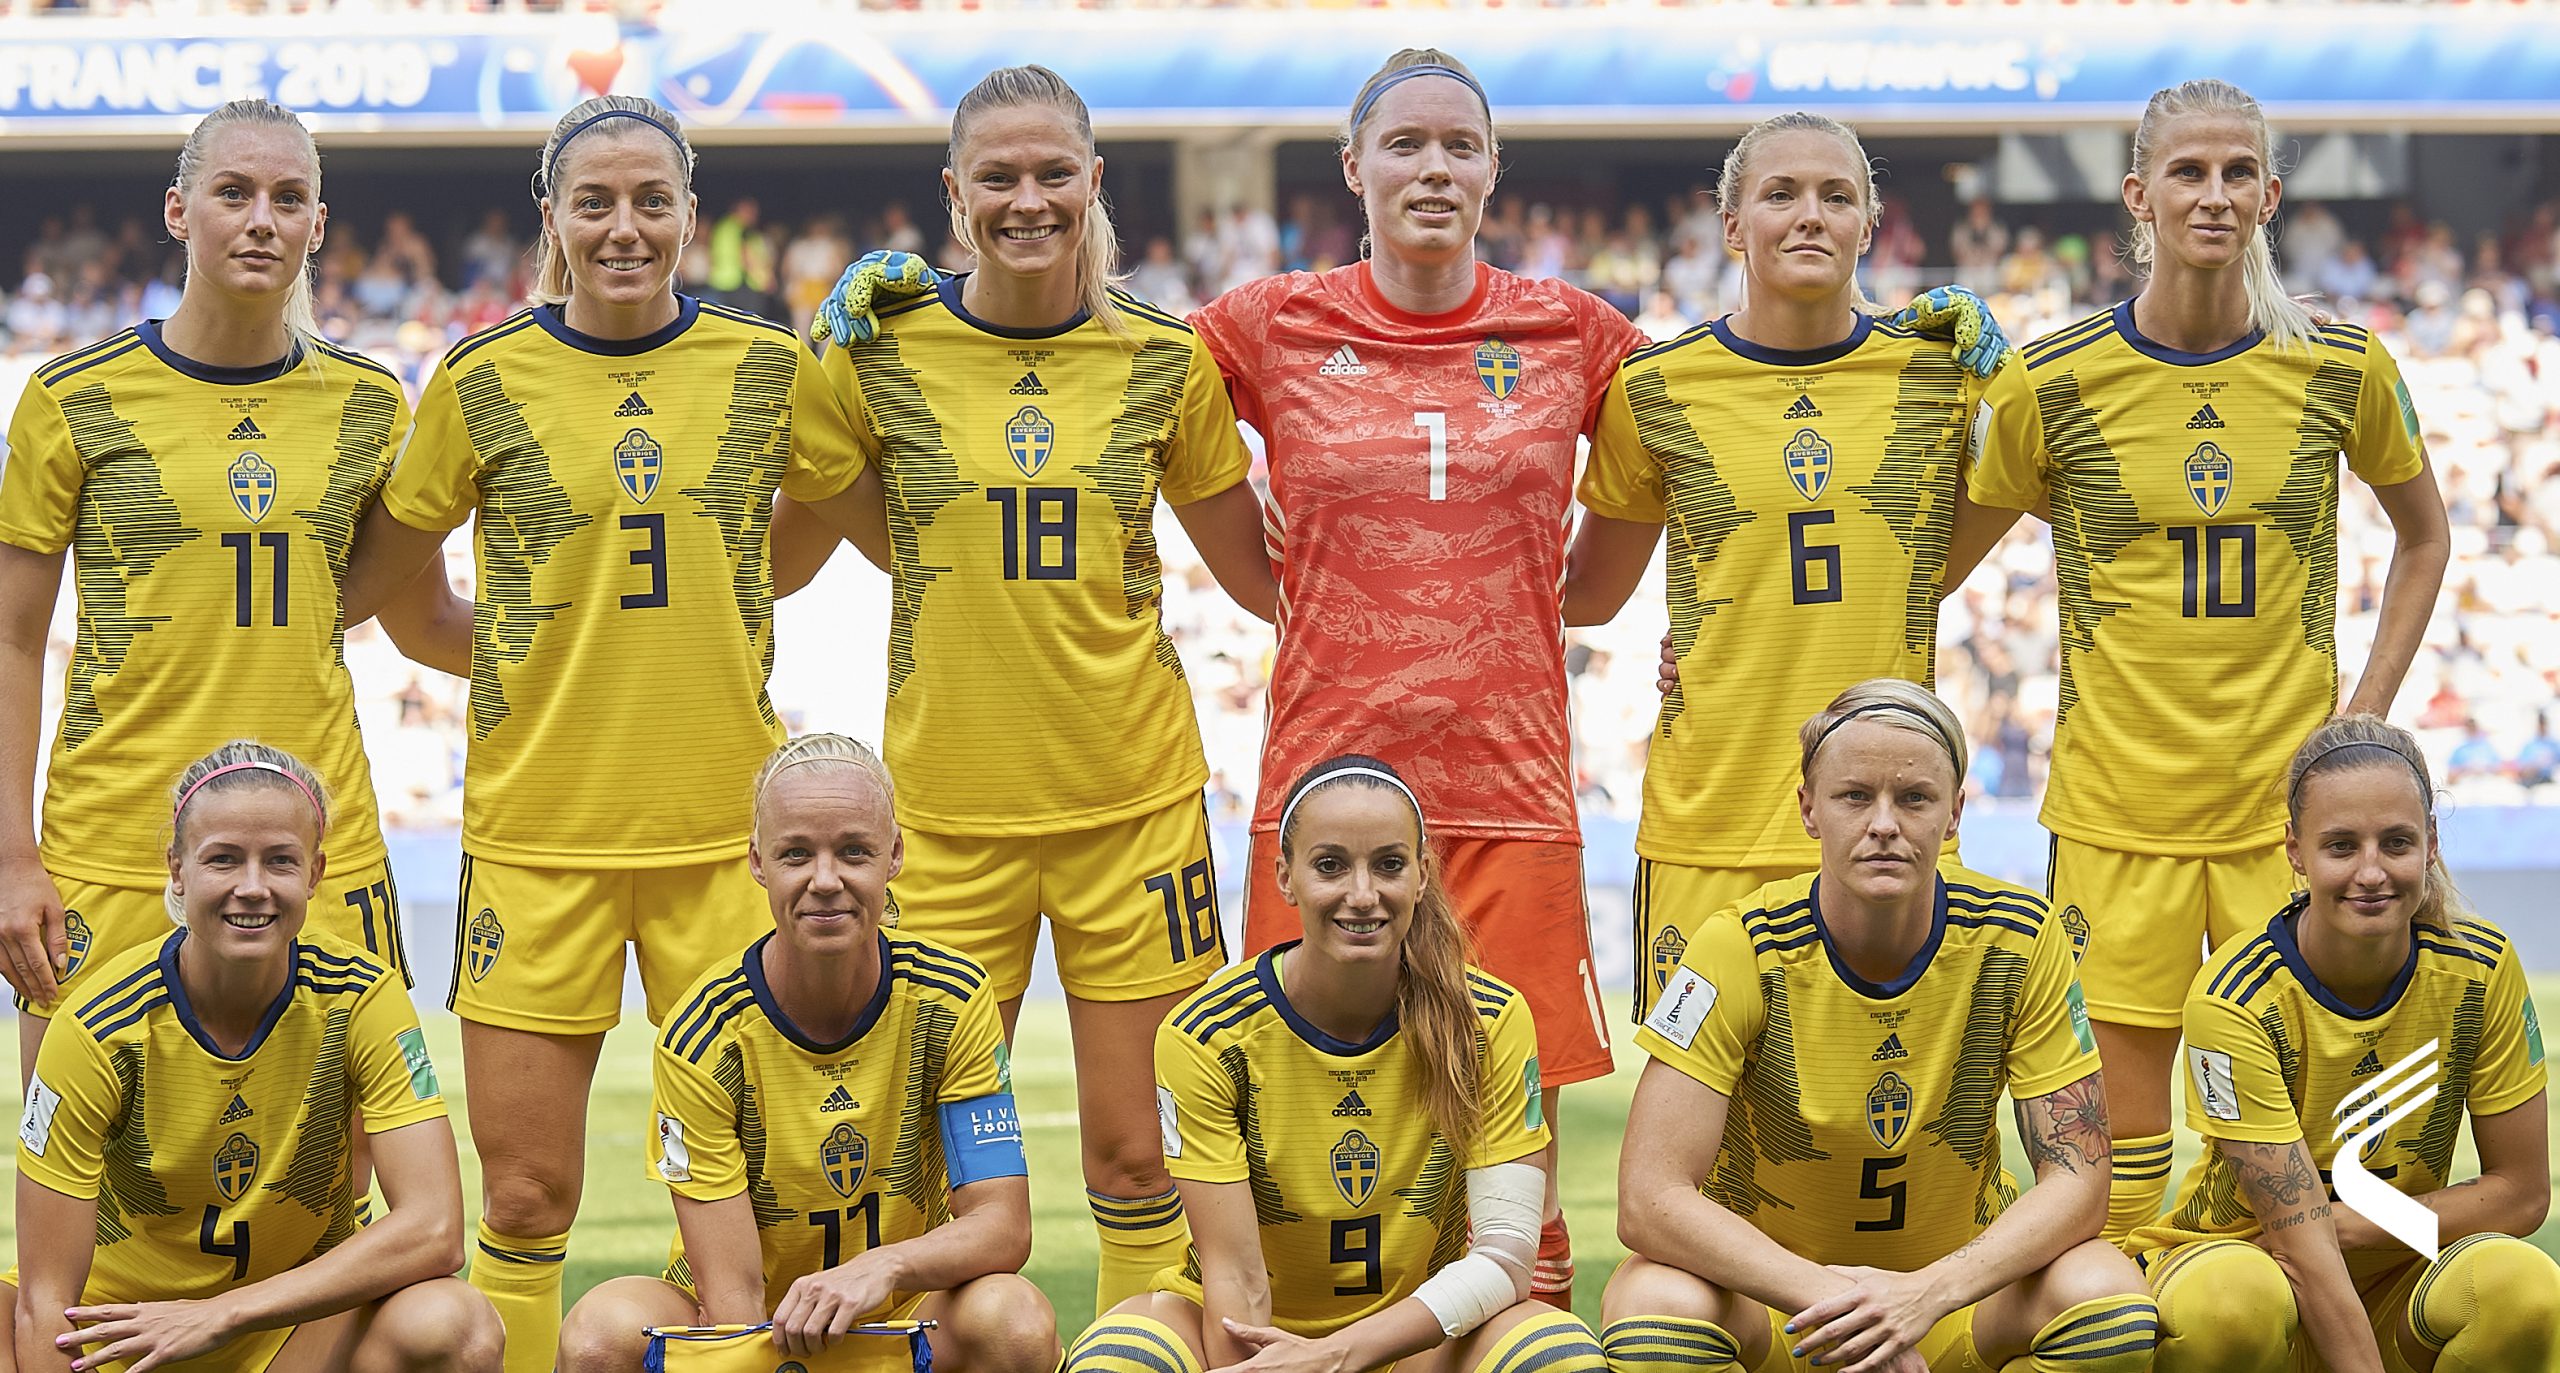 Sweden magnificent performance to book a semi-final date